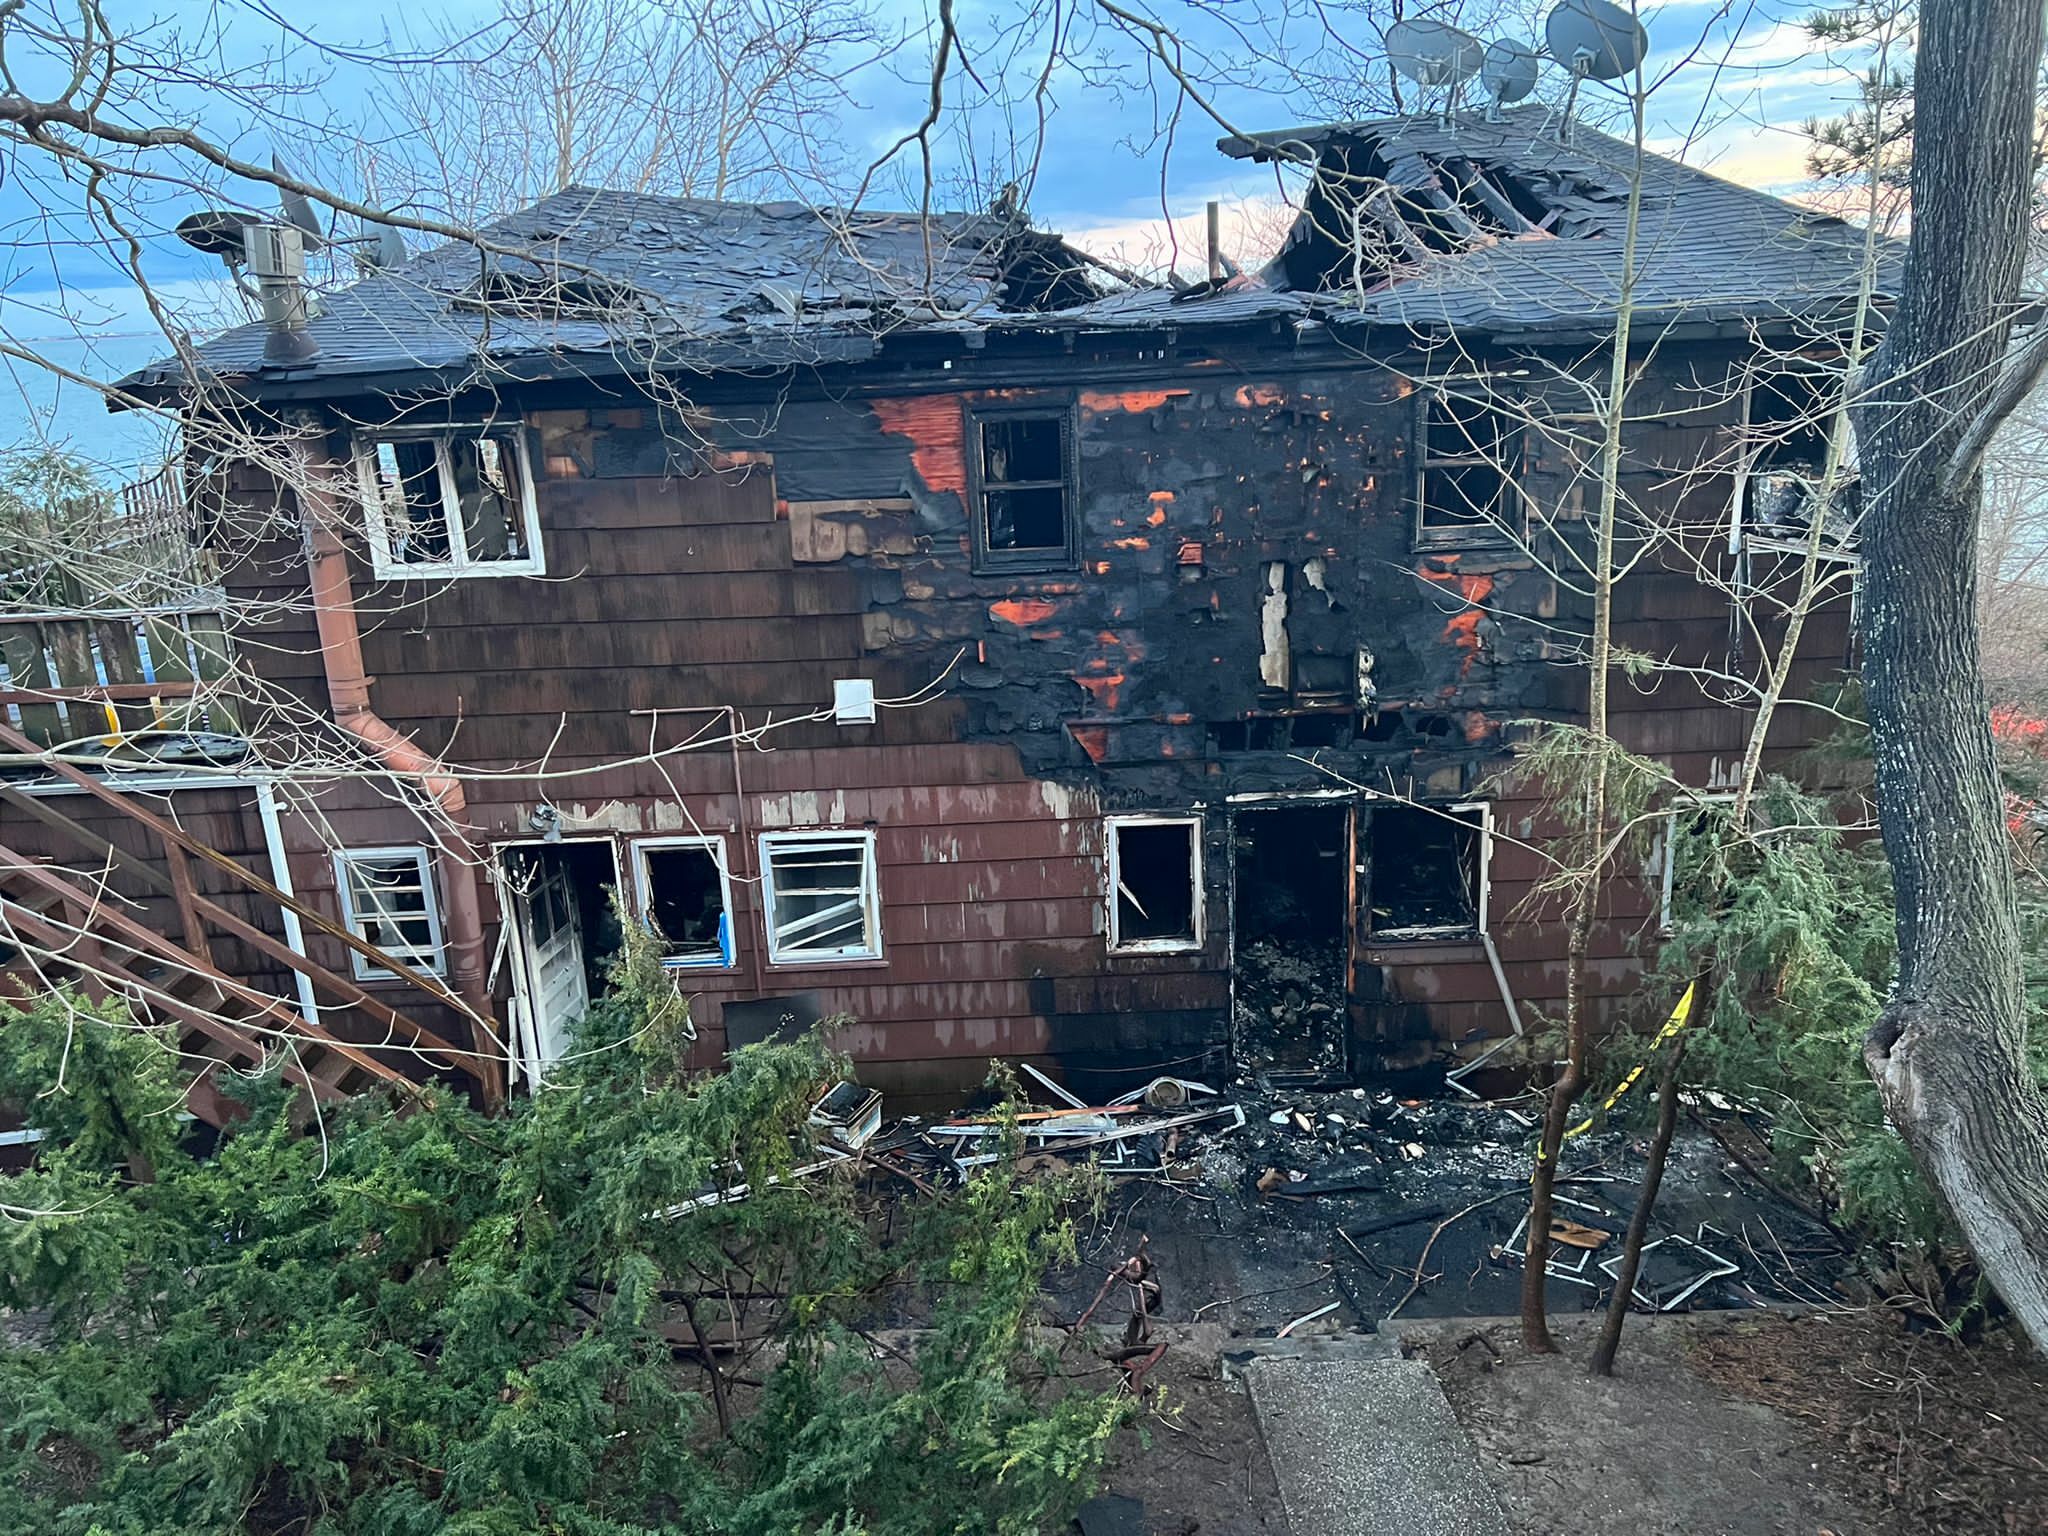 The aftermath of the fire at the 317 East Montauk Highway apartment building. COURTESY HERMES AND MARINA GONZALEZ